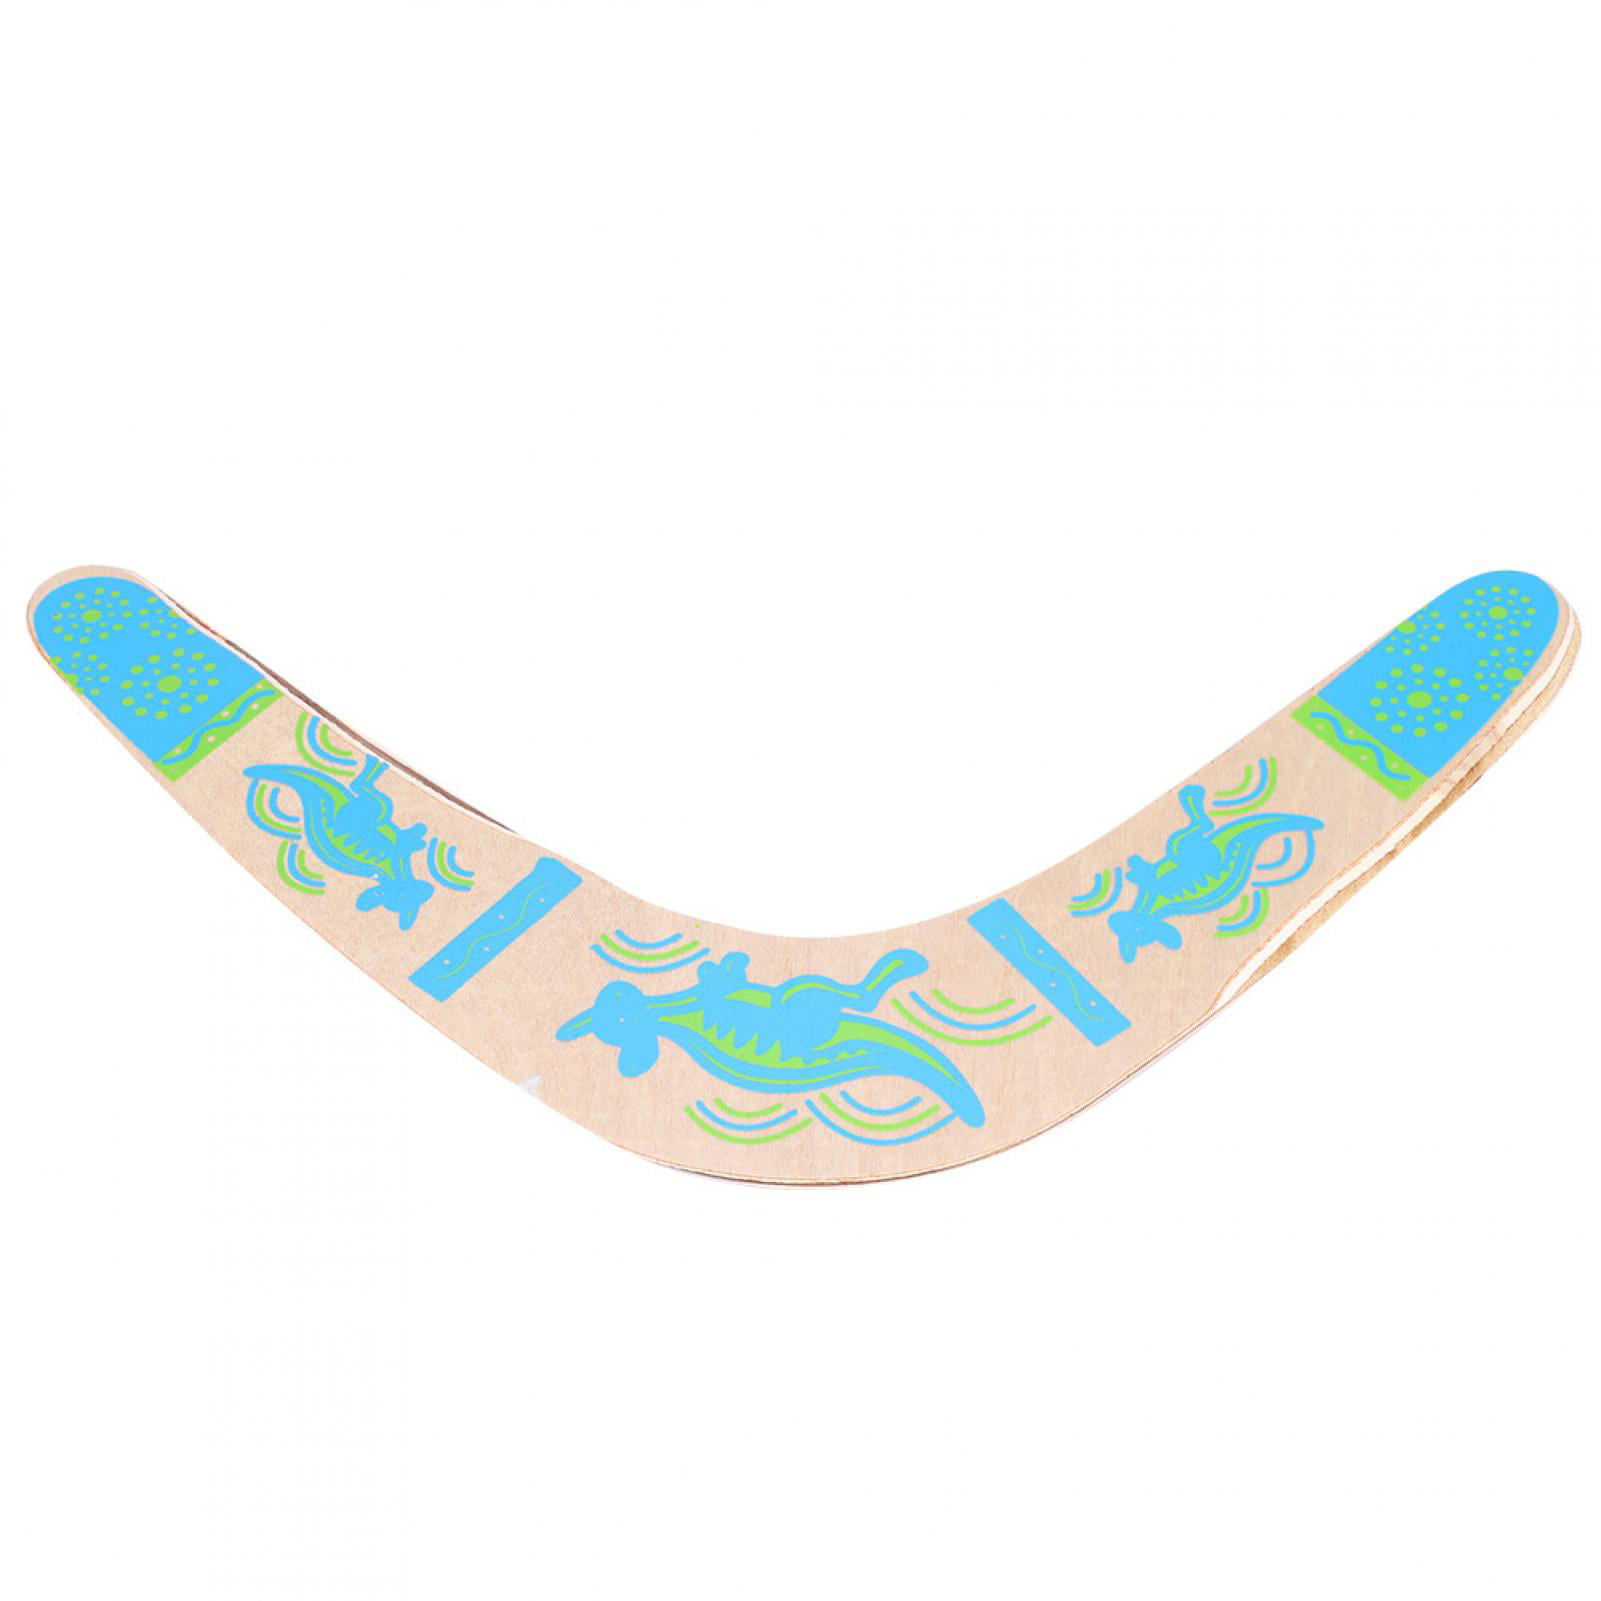 Details about   Wooden Returning Boomerang V-Shaped Boomerang Outdoor Games Sports Toy 